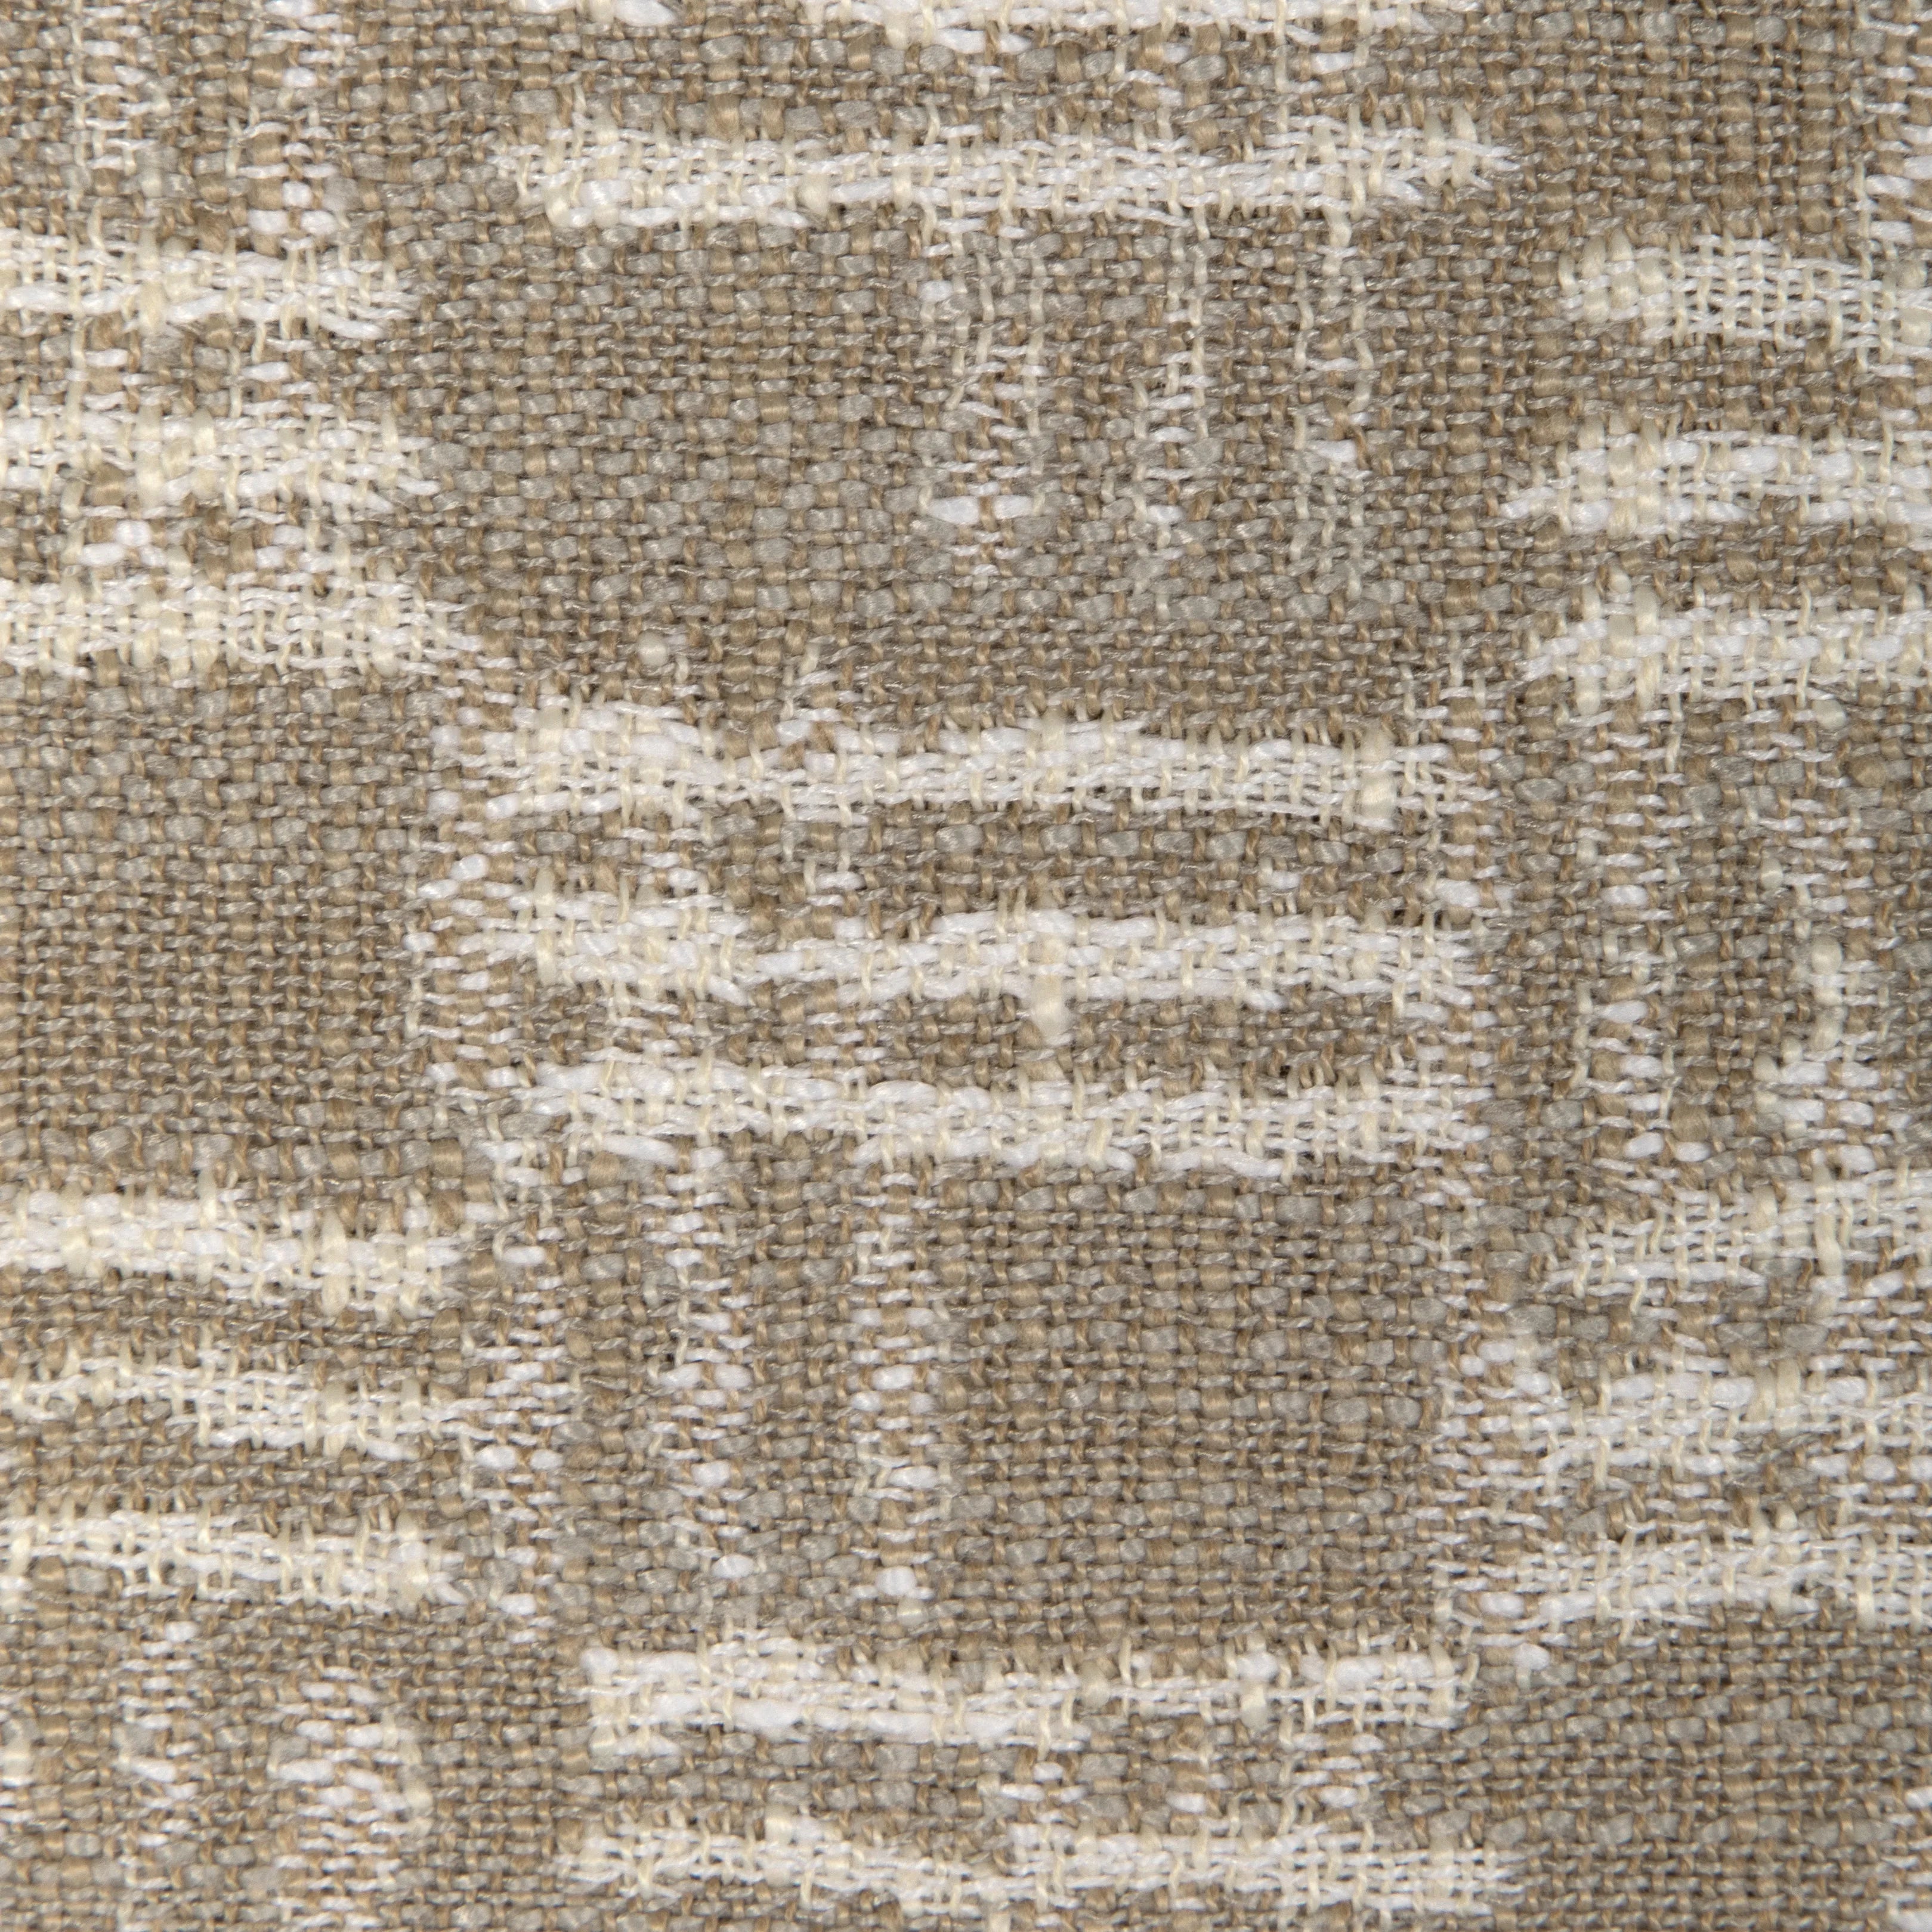 Closeup detail of Cross Waves fabric in sand color - pattern 36928.16.0 - by Kravet Couture in the Riviera collection